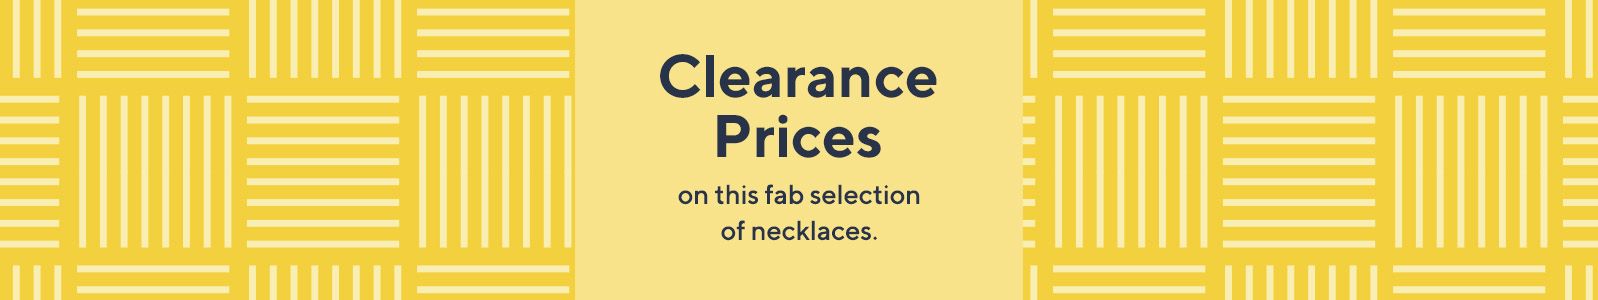 Clearance Prices on this fab selection of necklaces.